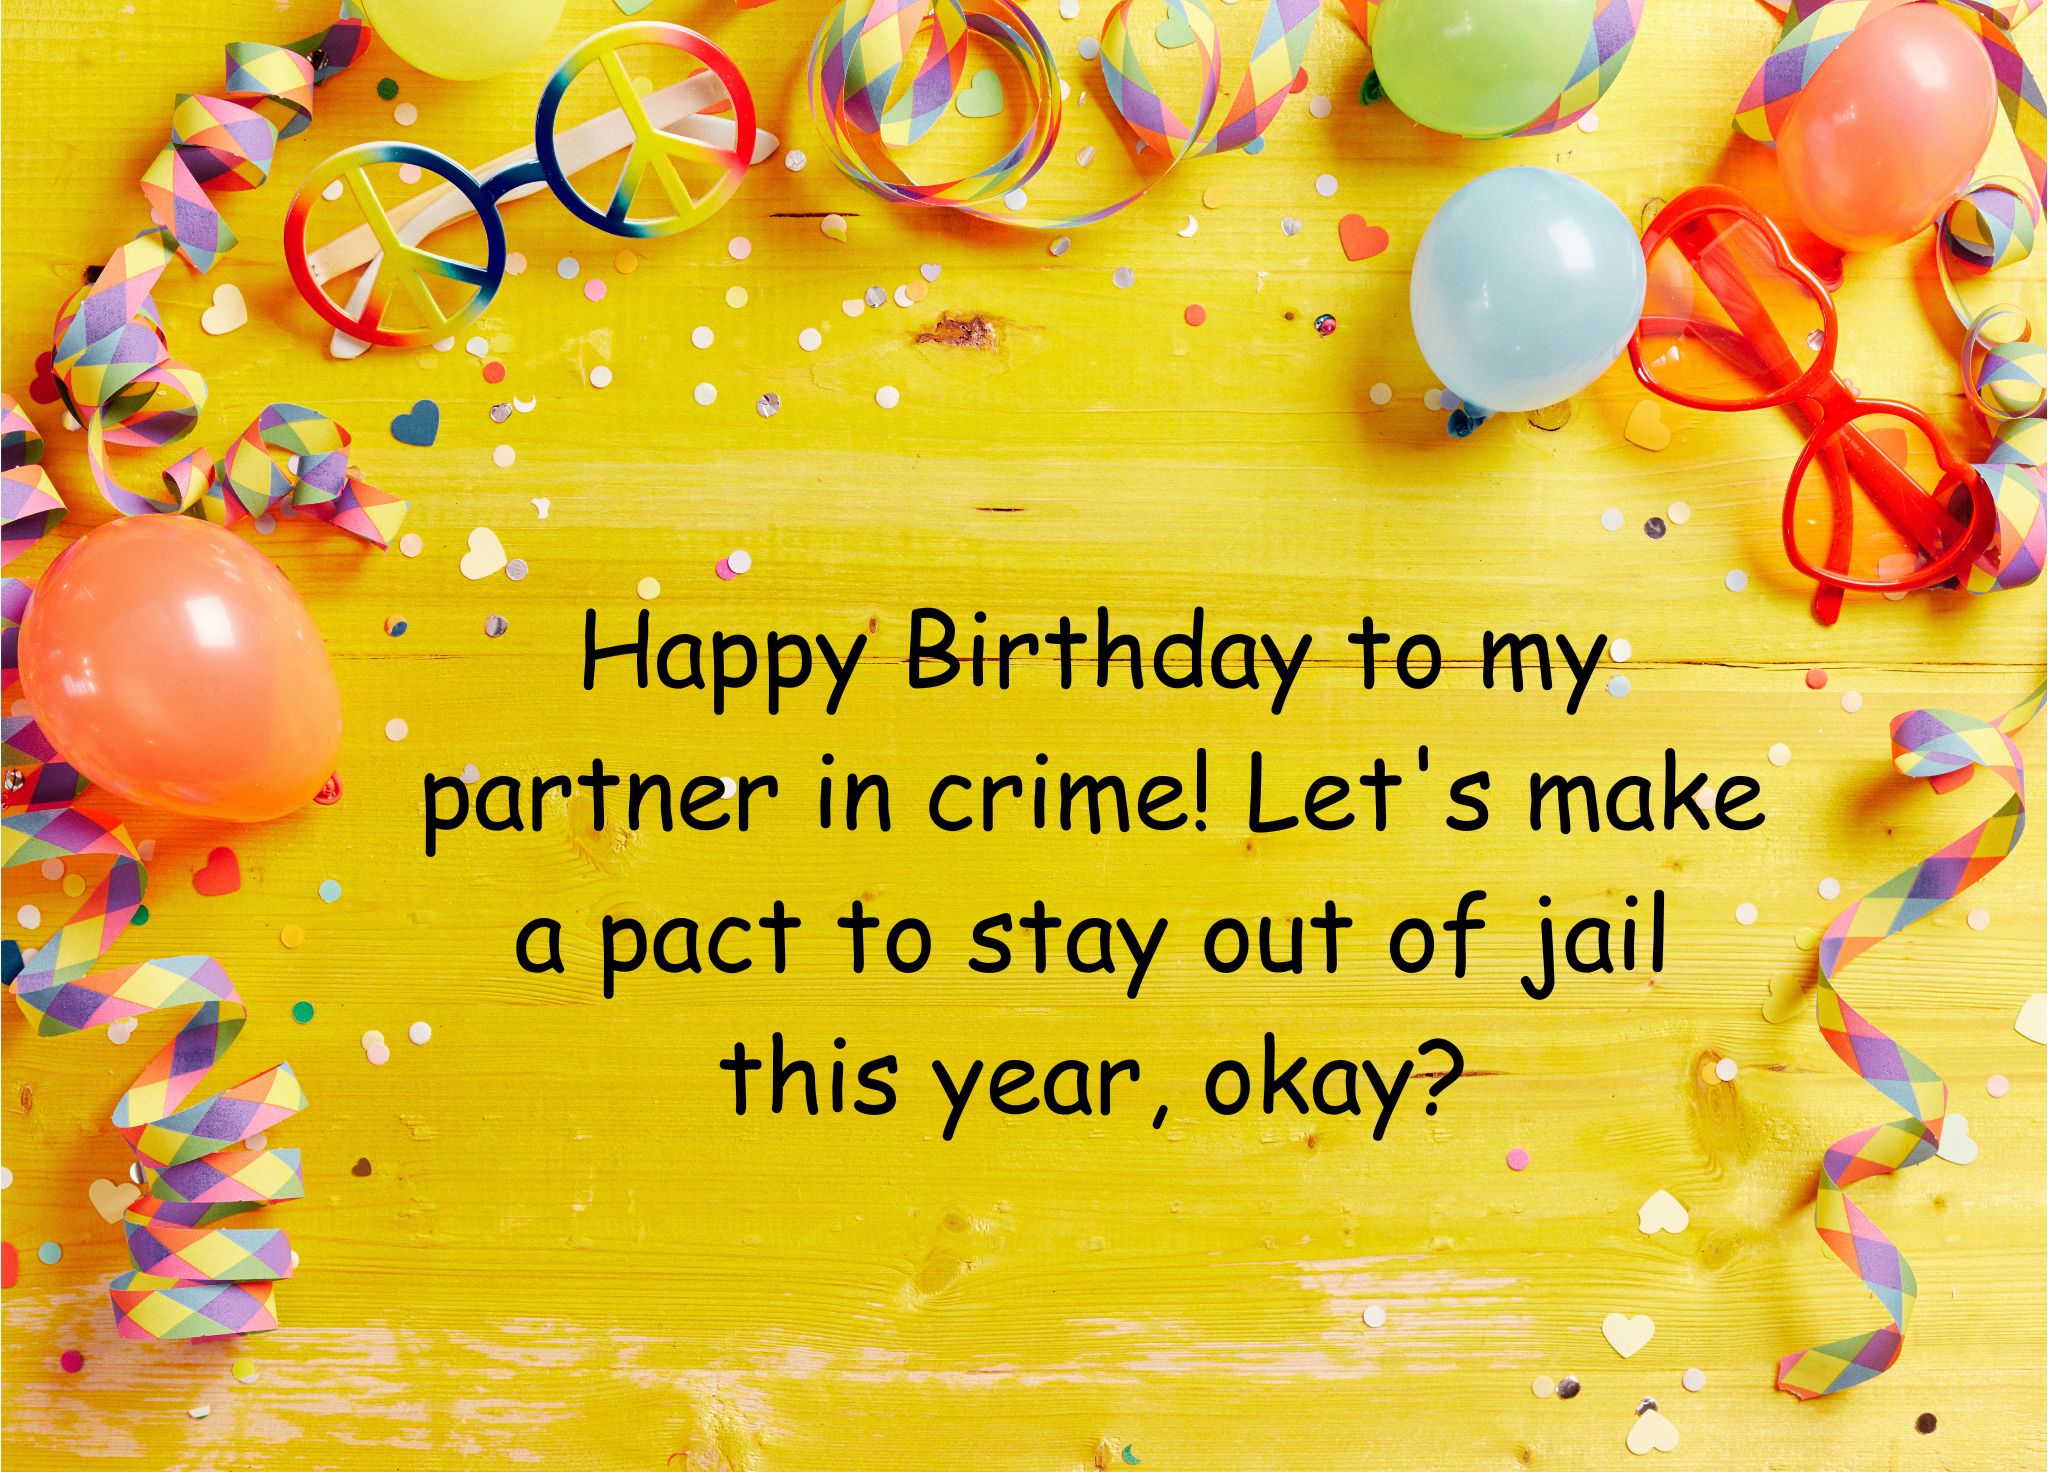 happy birthday to my partner in crime! let's make a pact to stay out of jail this year, okay